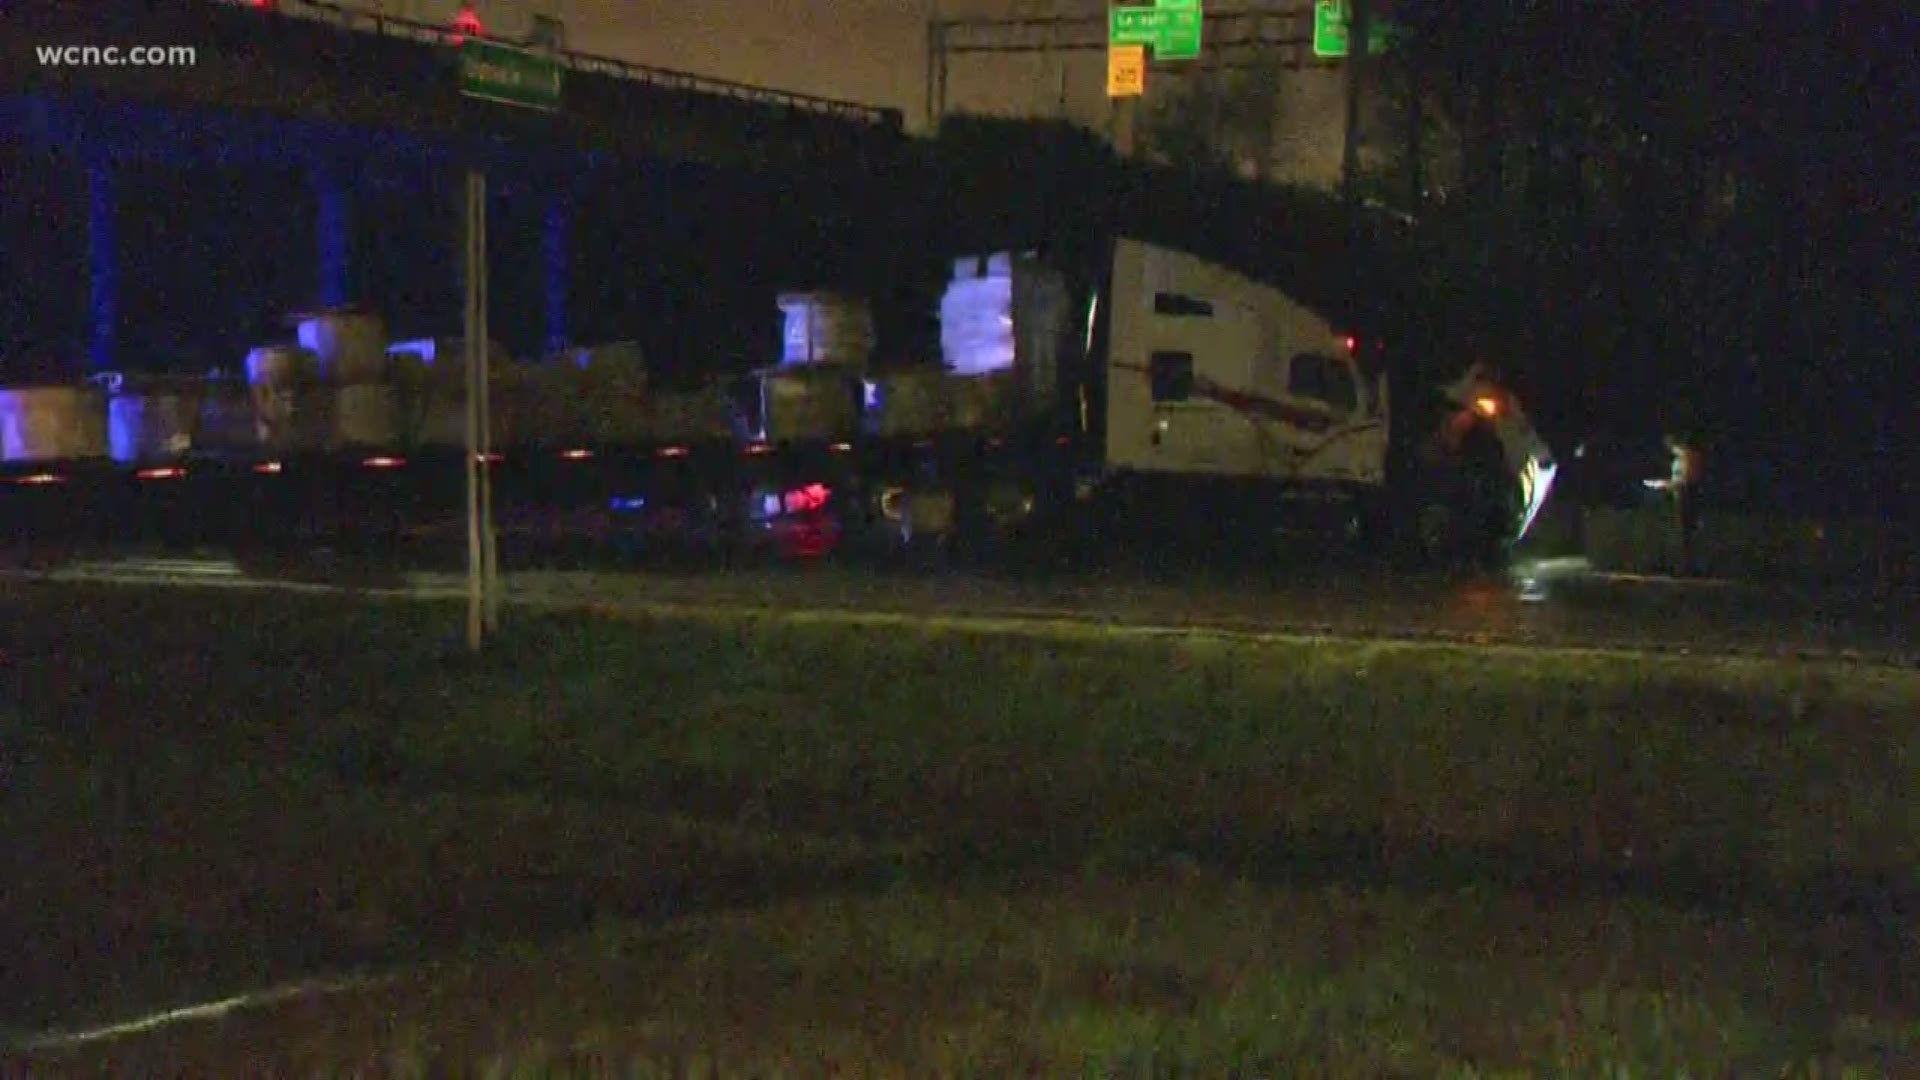 One lane of I-85 southbound at the I-77 connector is back open after a crash involving a tractor-trailer early Wednesday morning.